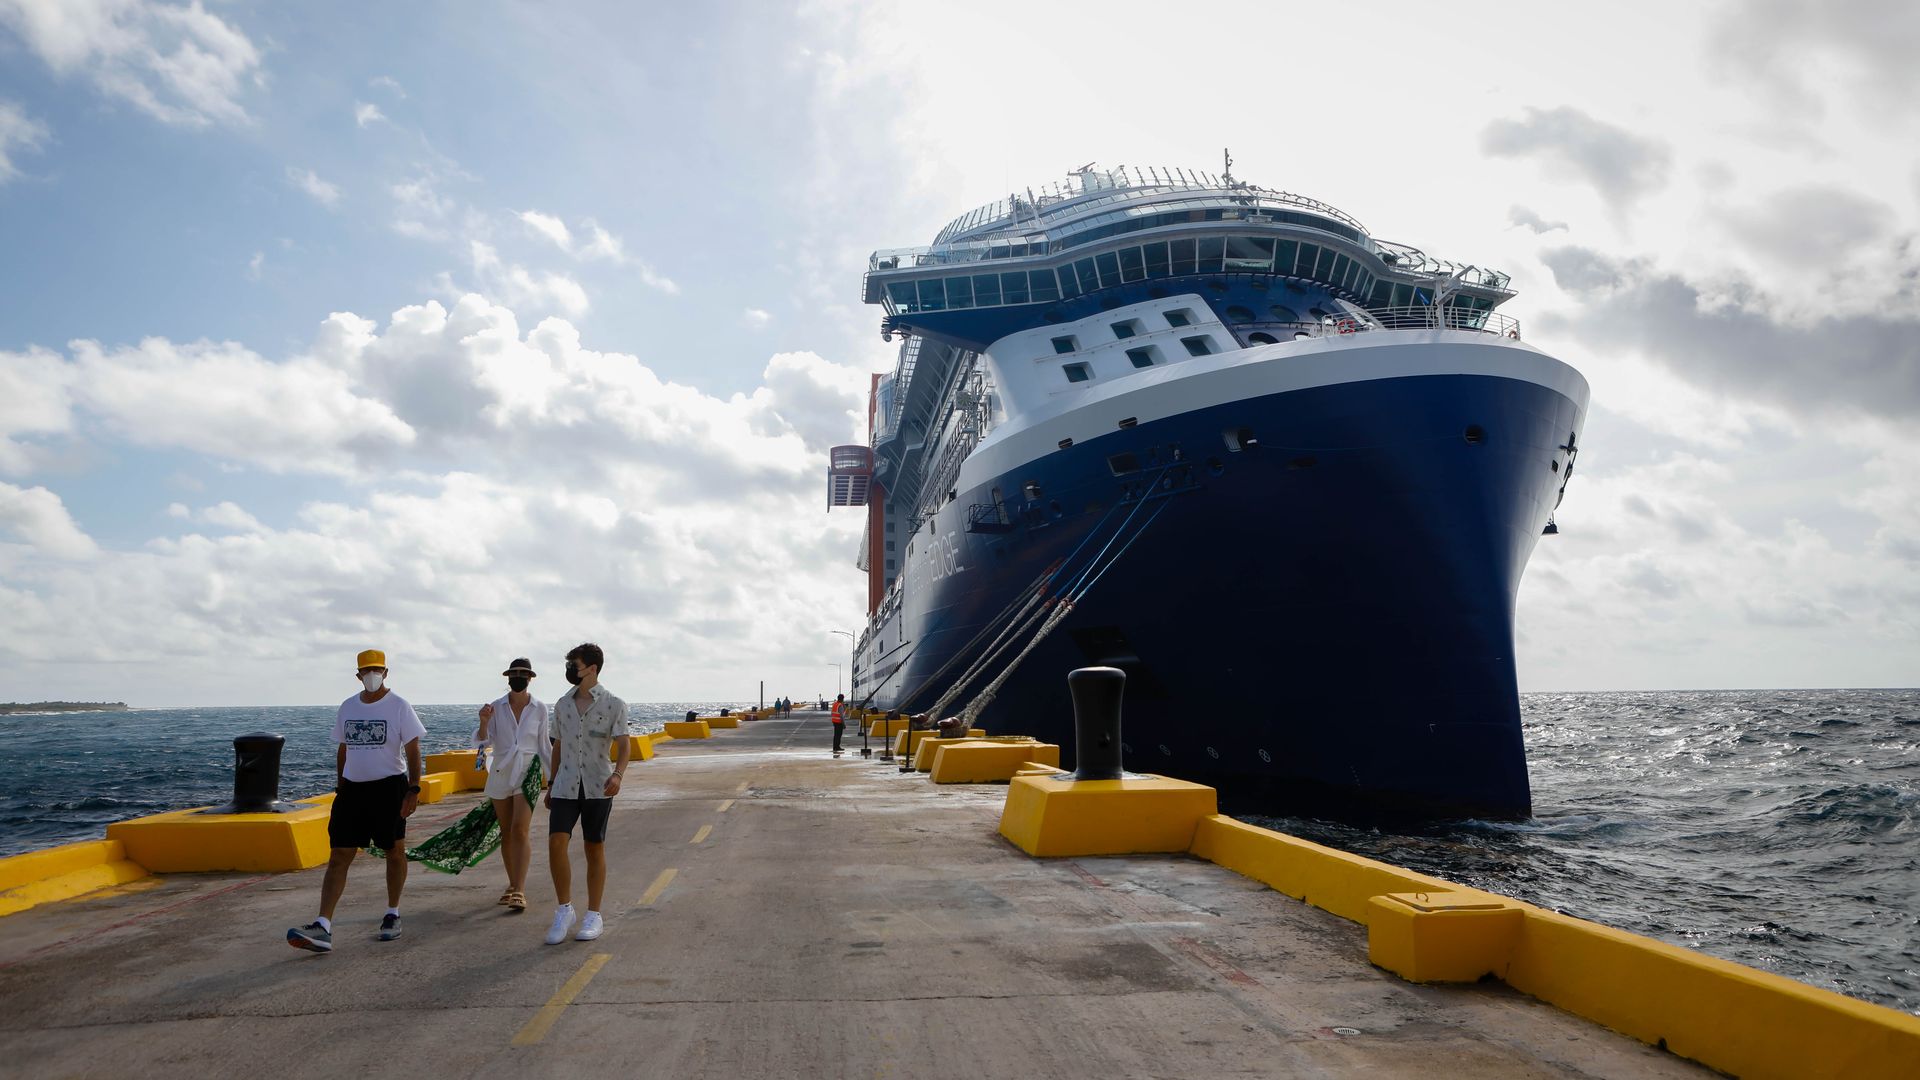 Photo of a blue and white cruise docked at a harbor and three people walking on the deck